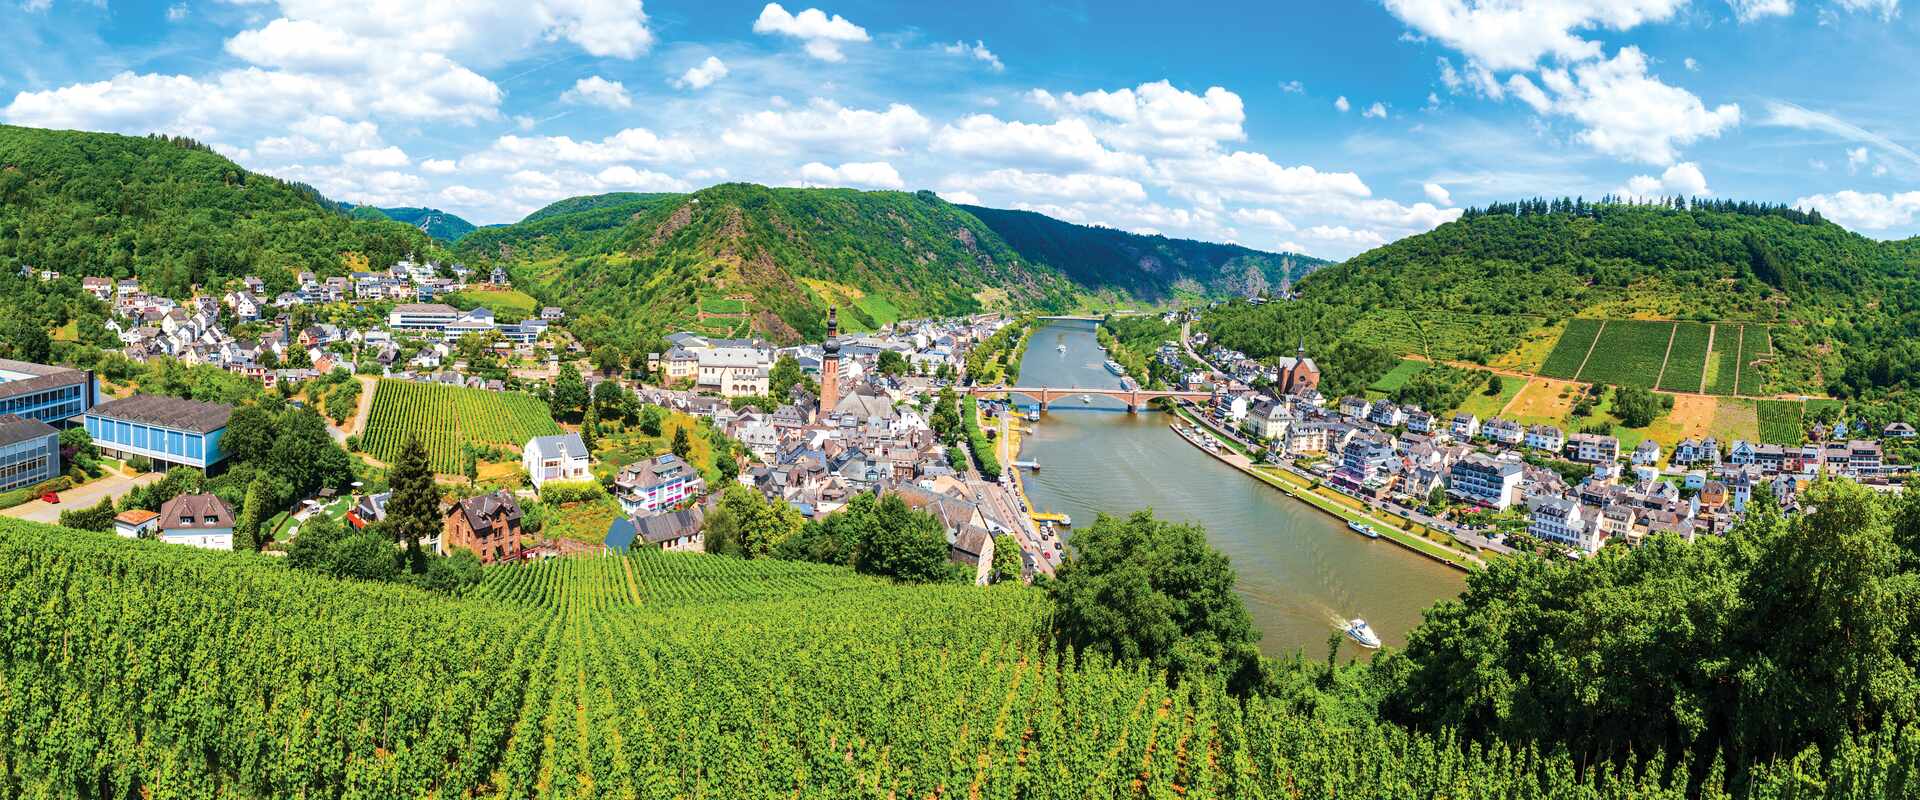 Aerial view of Moselle Valley vineyard and cochem town, Germany